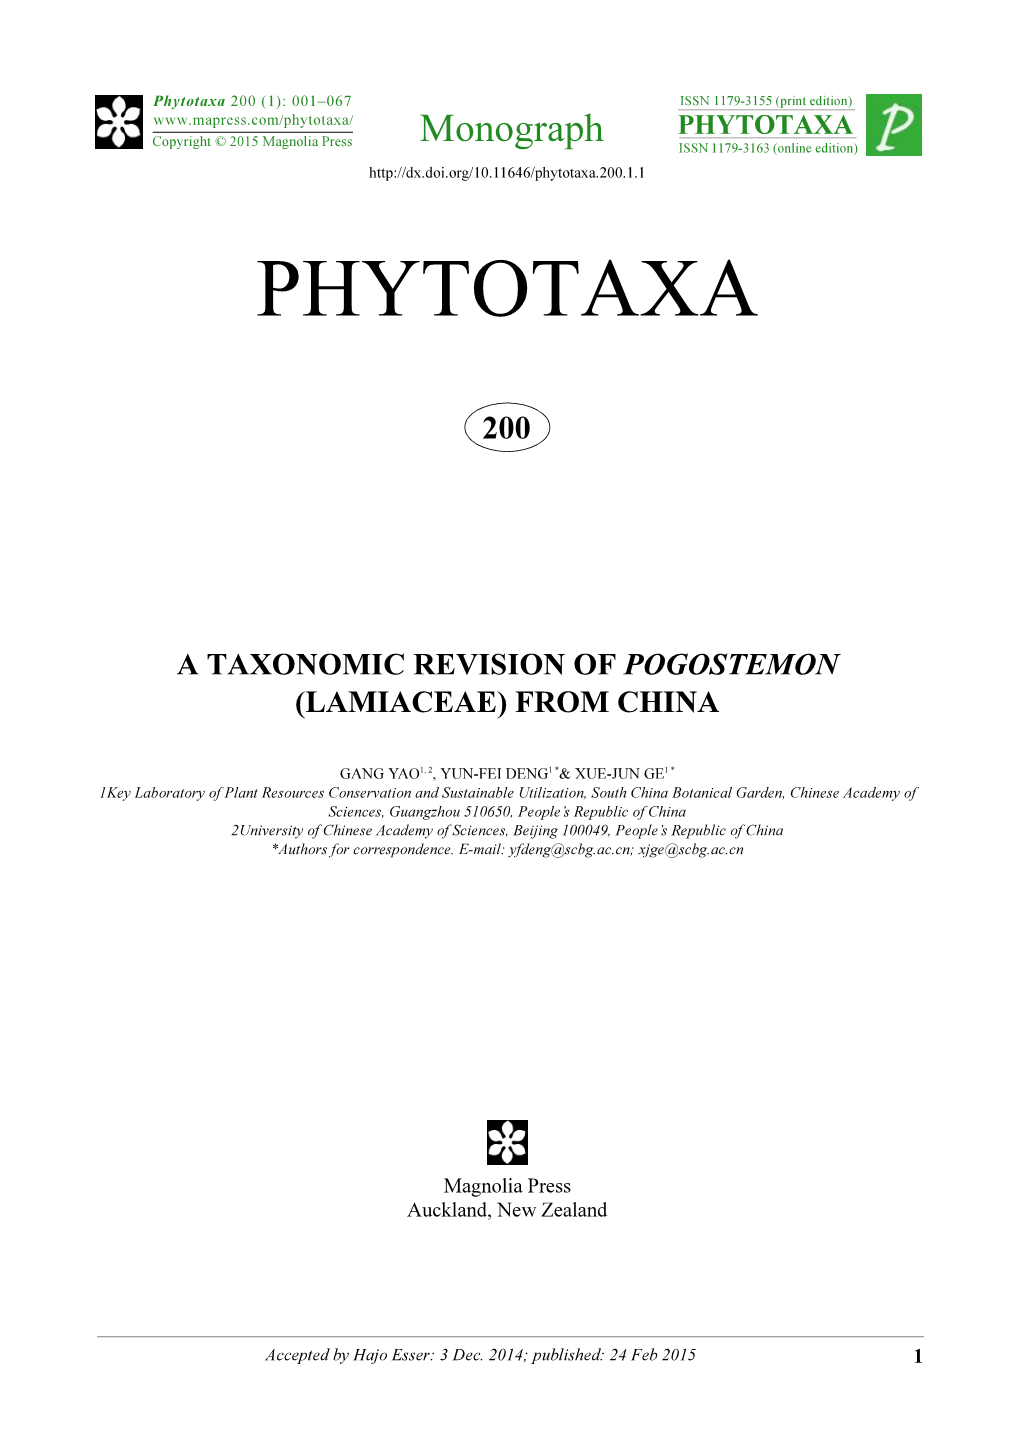 A Taxonomic Revision of Pogostemon (Lamiaceae) from China